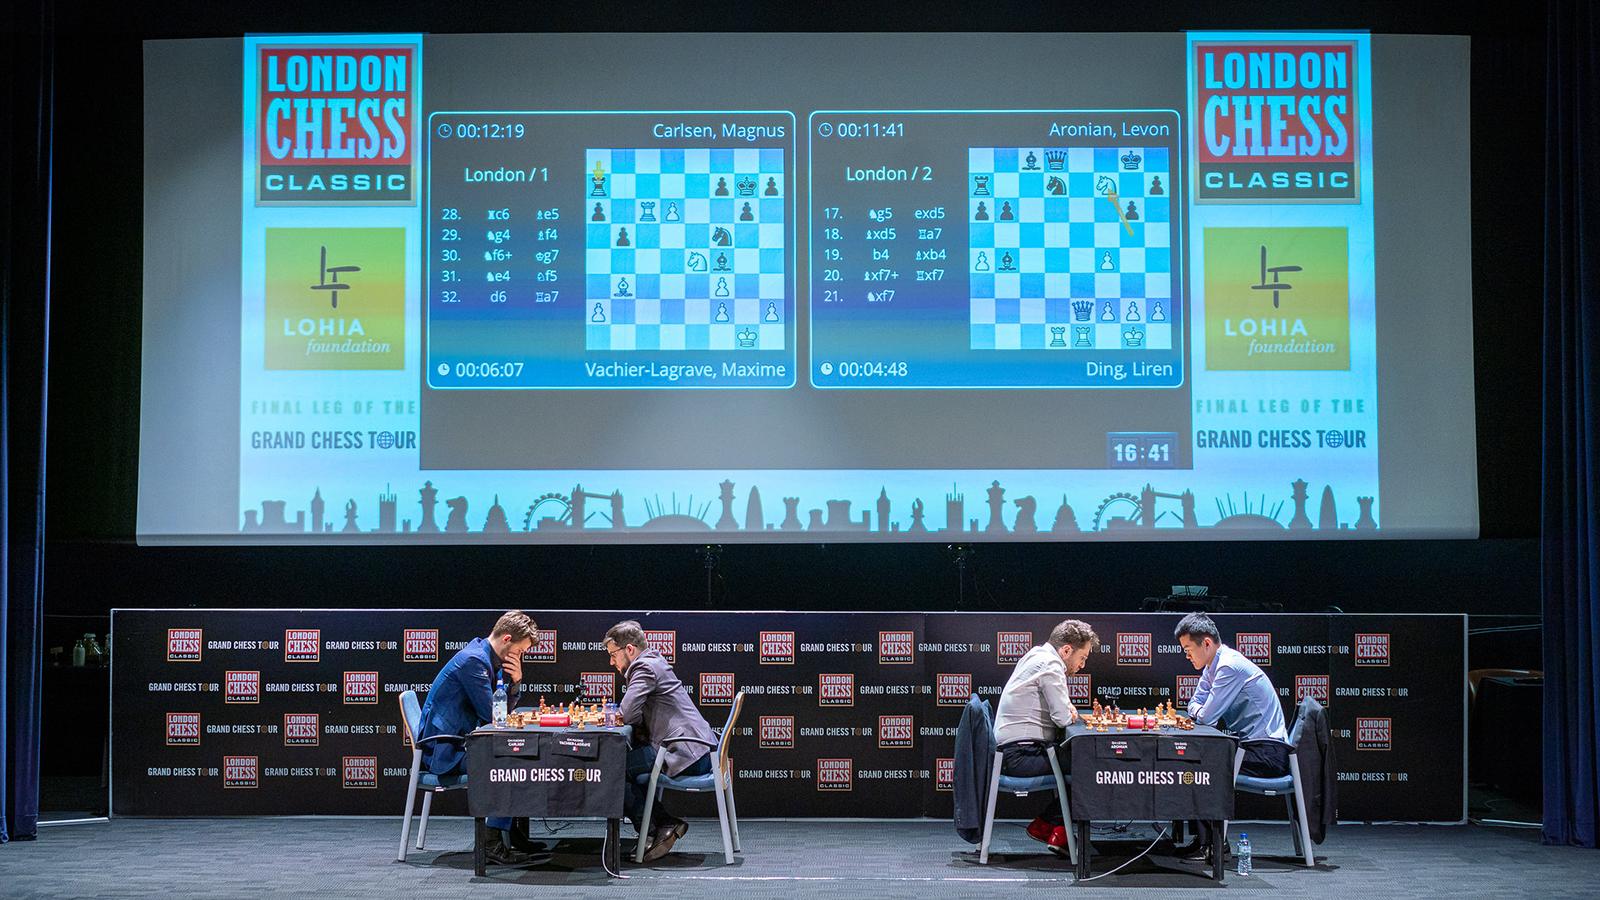 Ding Liren and Magnus Carlsen are set - Grand Chess Tour